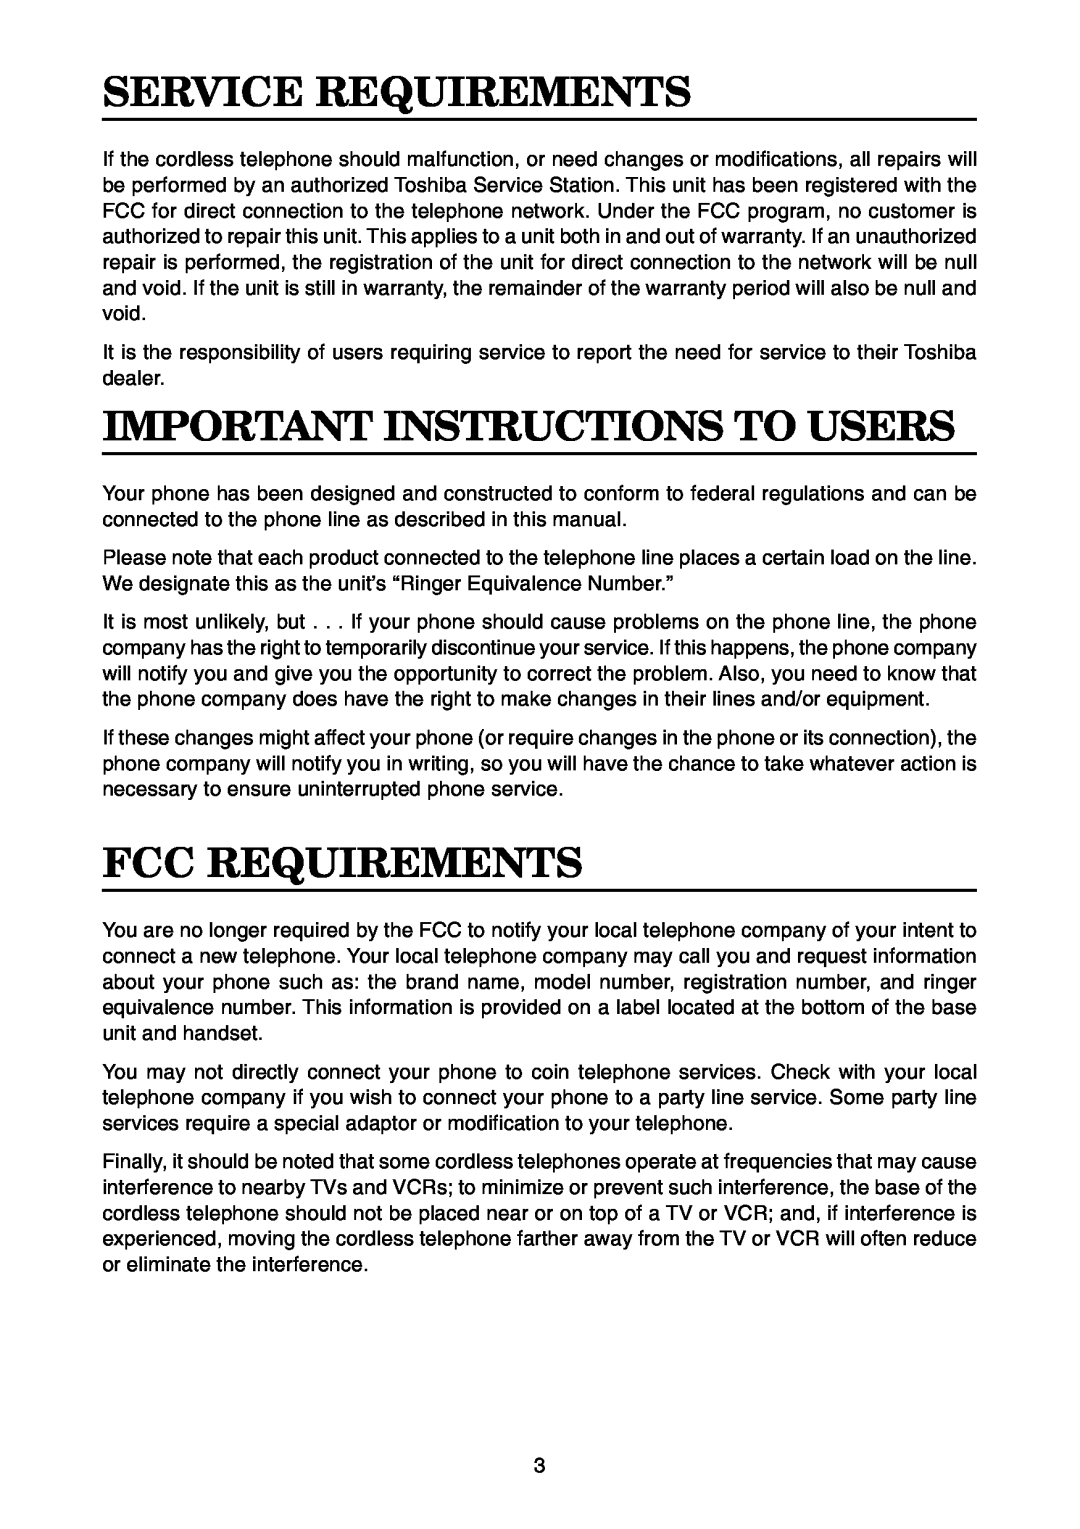 Toshiba FT-8001 AW manual Service Requirements, Important Instructions To Users, Fcc Requirements 